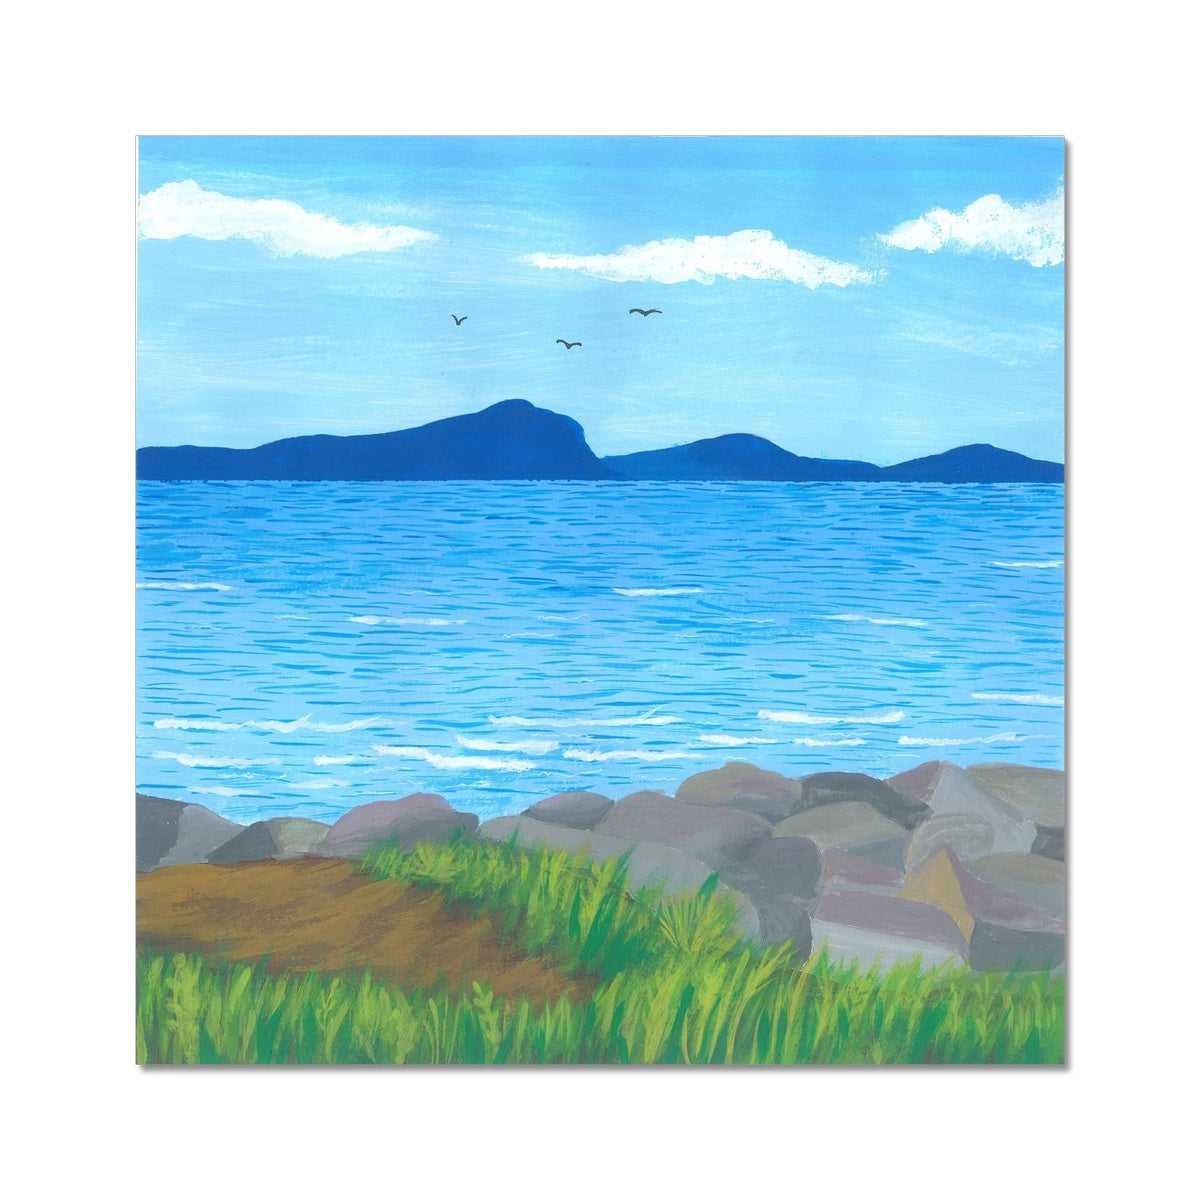 Gentle Ocean Waves on Rocks - Seaside Calm with Distant Hills and Flying Birds Fine Art Print - nature soundscape art - earth.fm